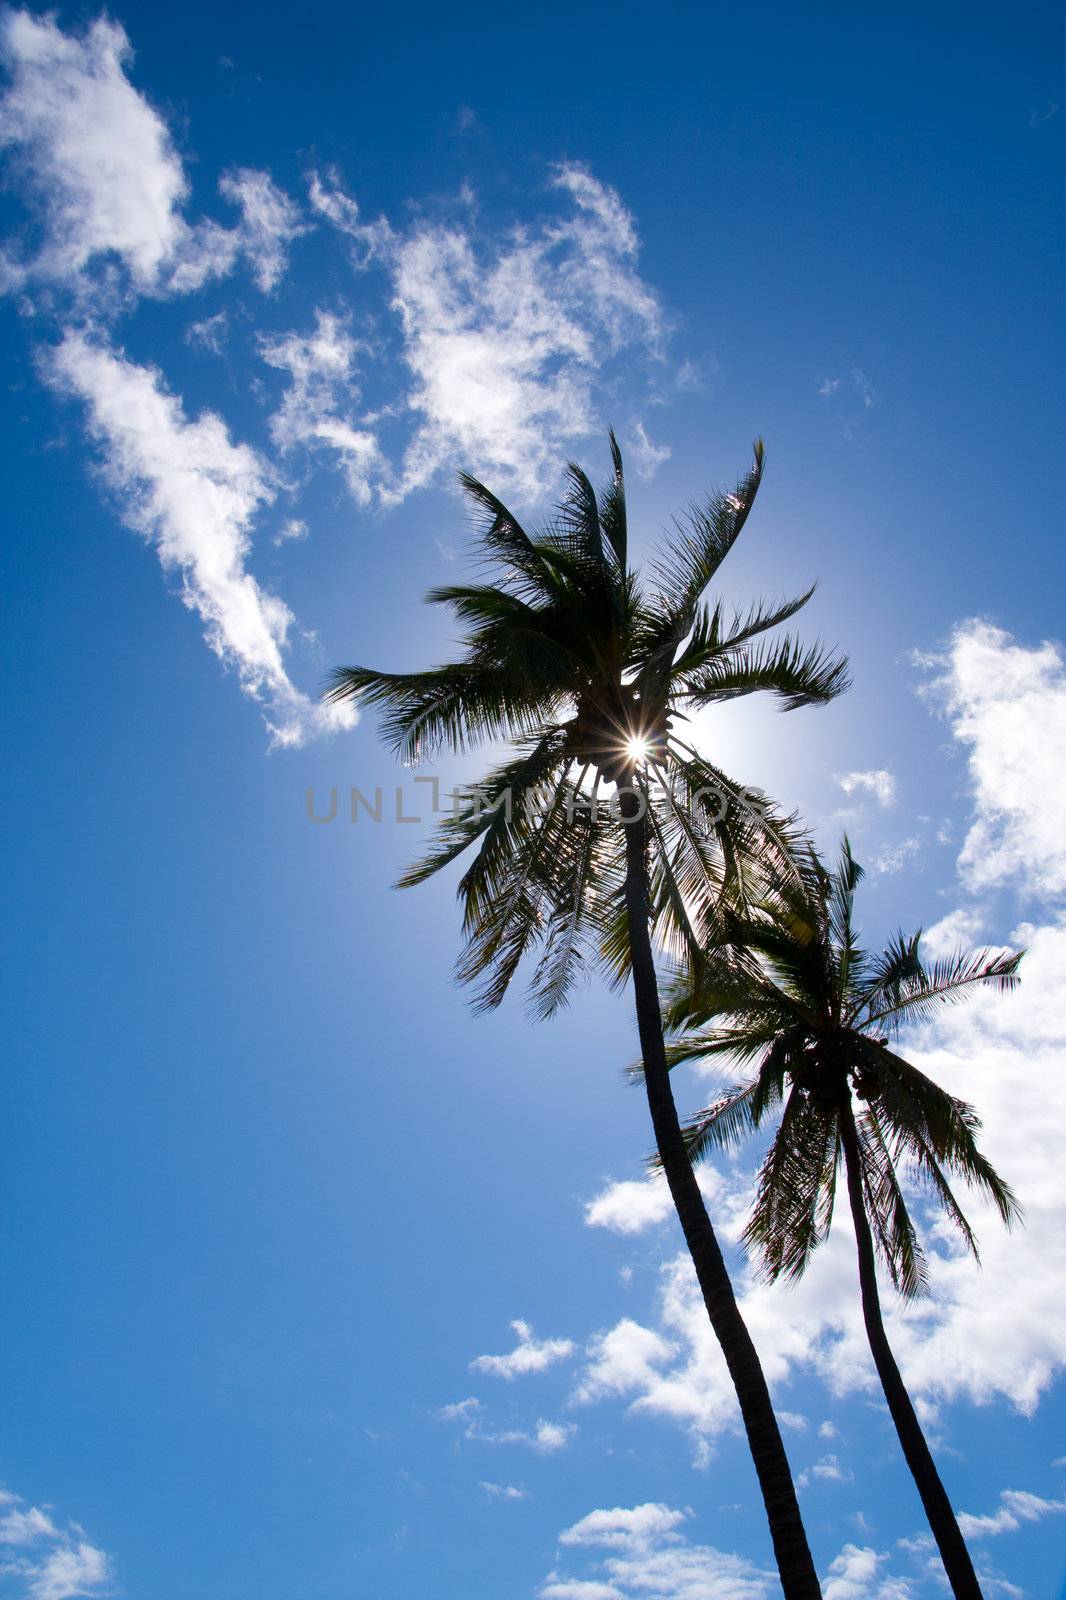 Palm trees silhouette on beautiful blue sky with white clouds by svanblar